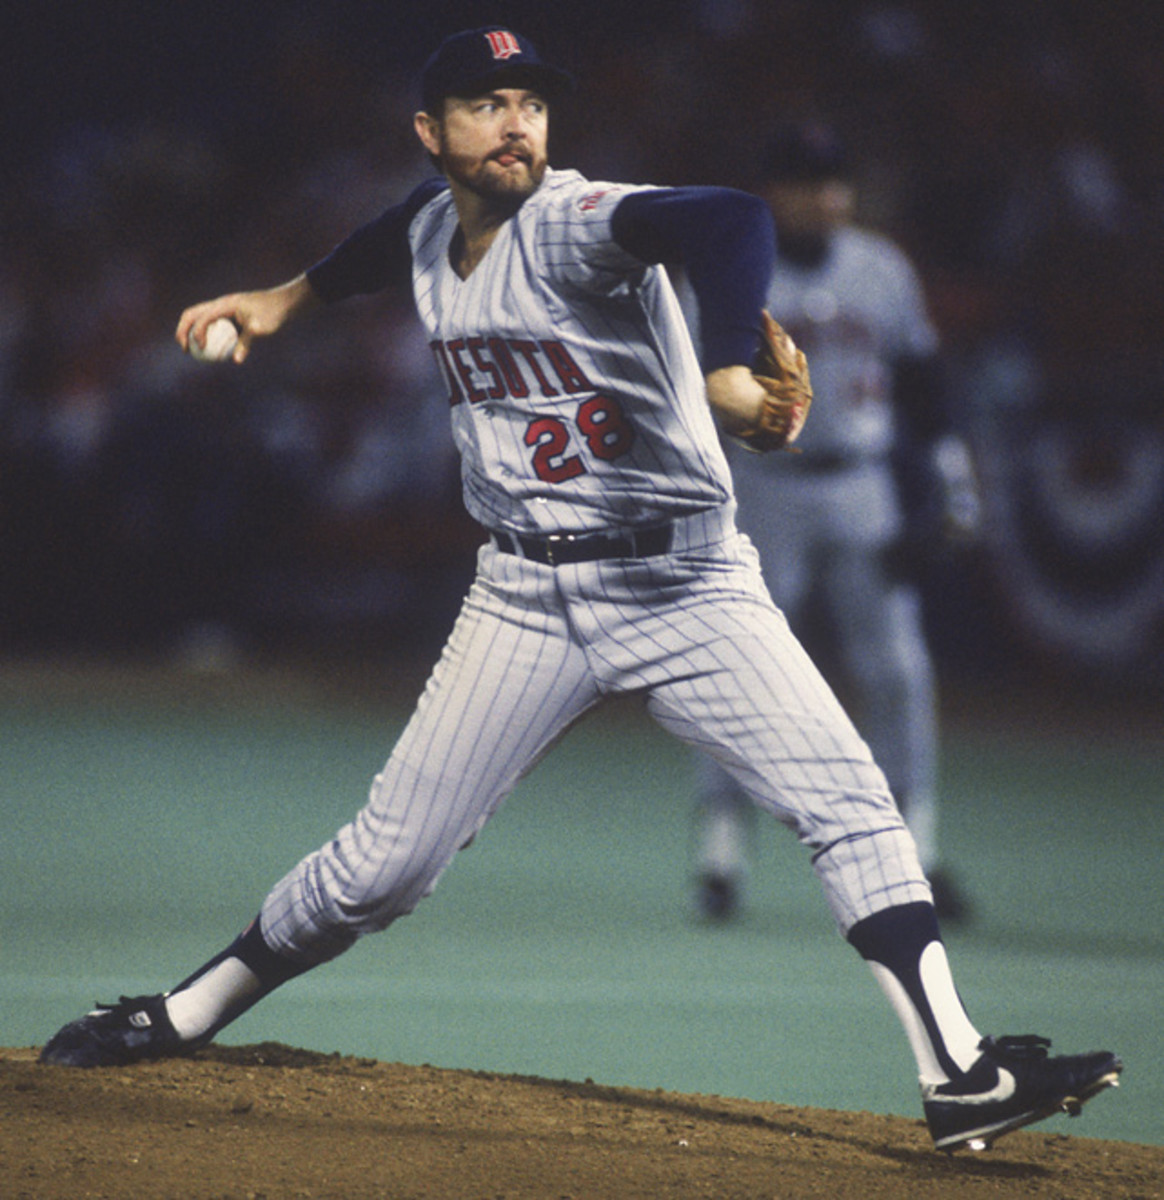 Bert Blyleven Signed Twins 16x20 Photo Inscribed 3701 Career Strikeouts  (JSA)